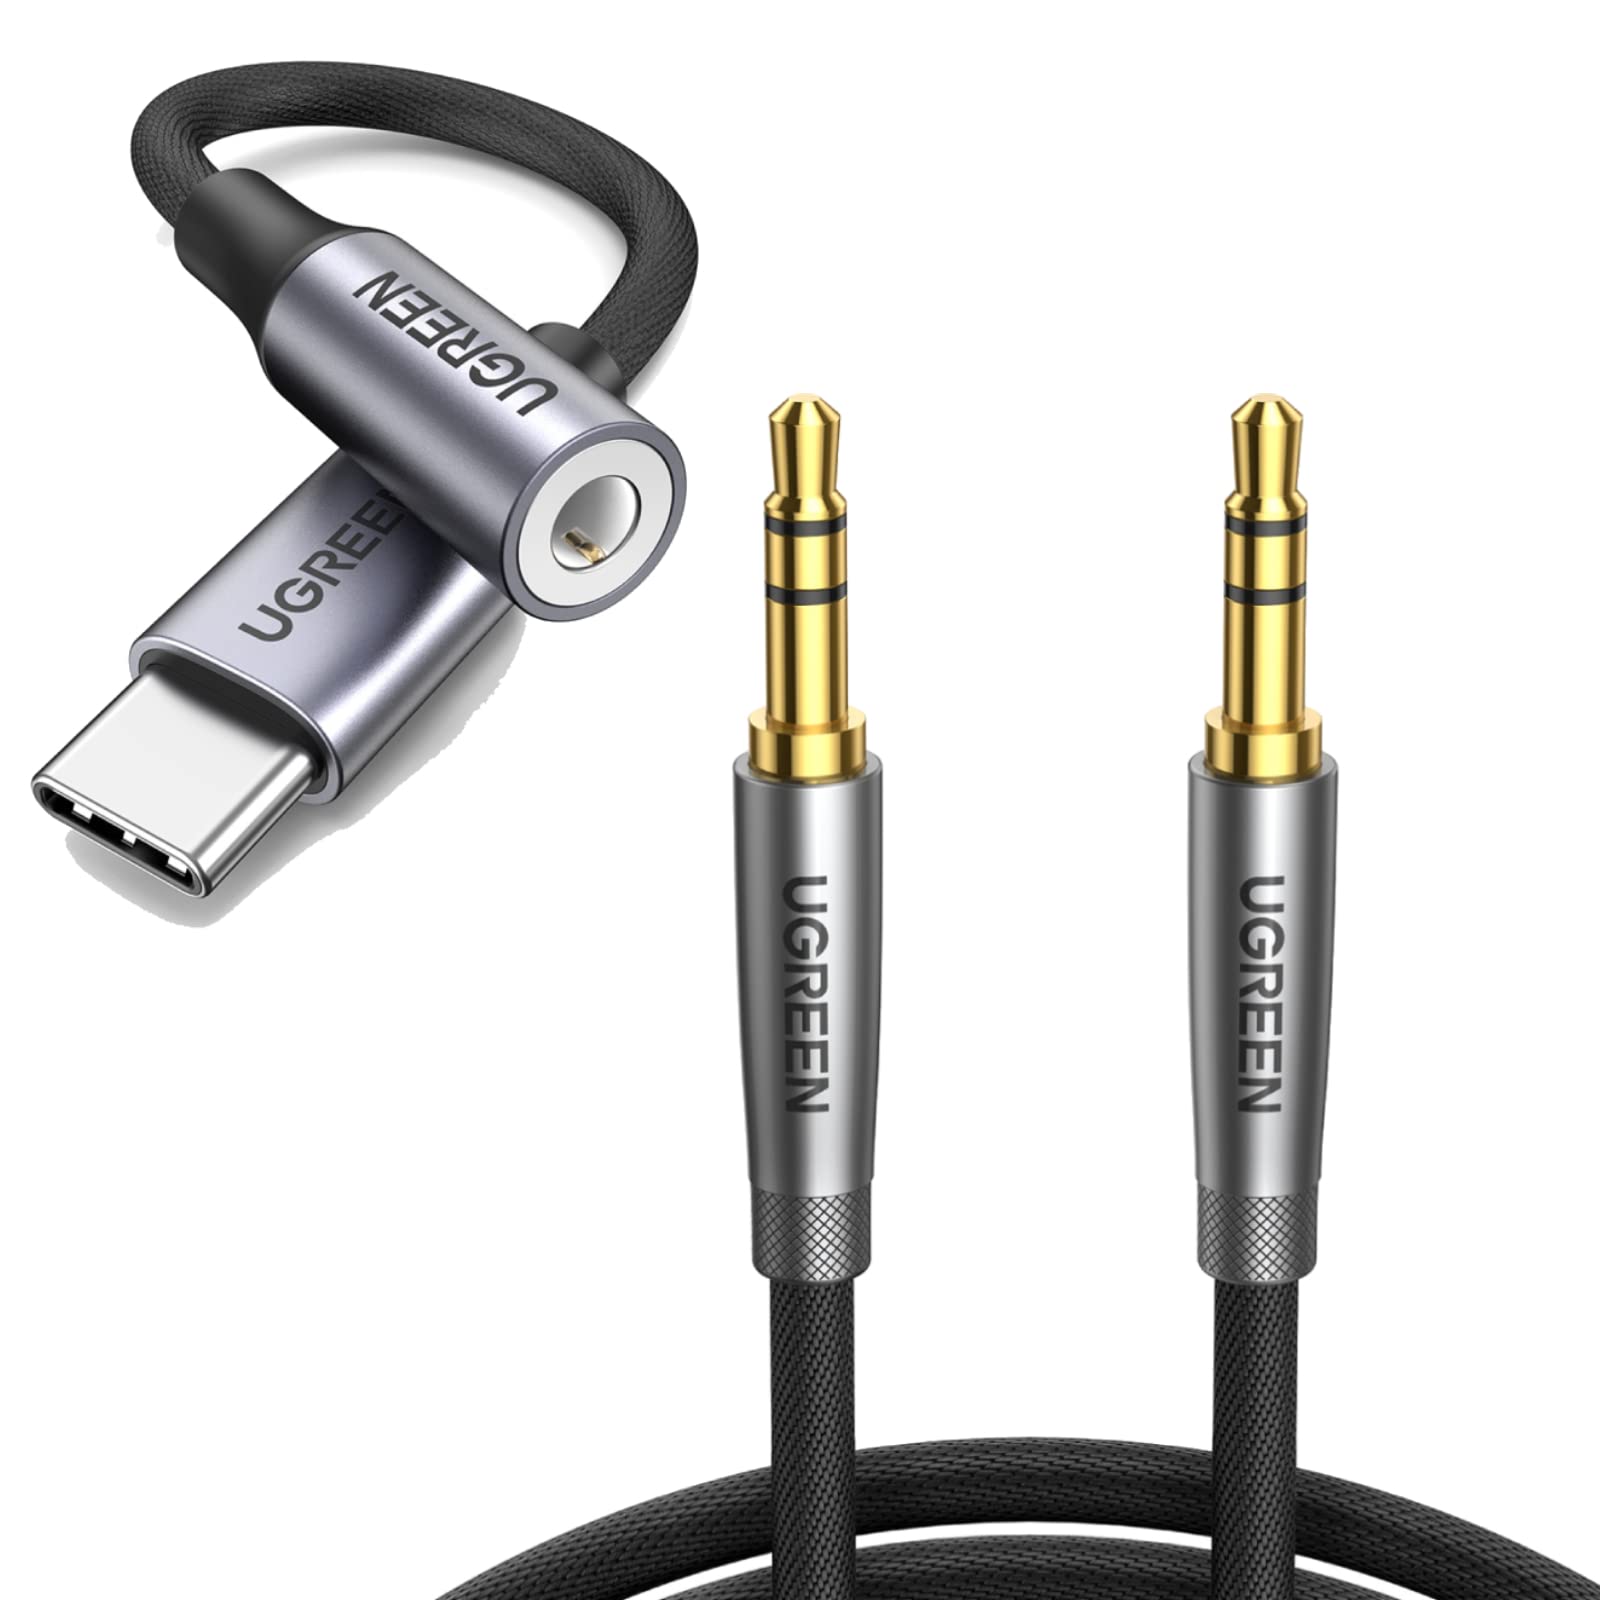 UGREEN USB C to 3.5mm Audio Adapter Type C to Headphone Bundle with 3.5mm Audio Cable Nylon Braided Male to Male